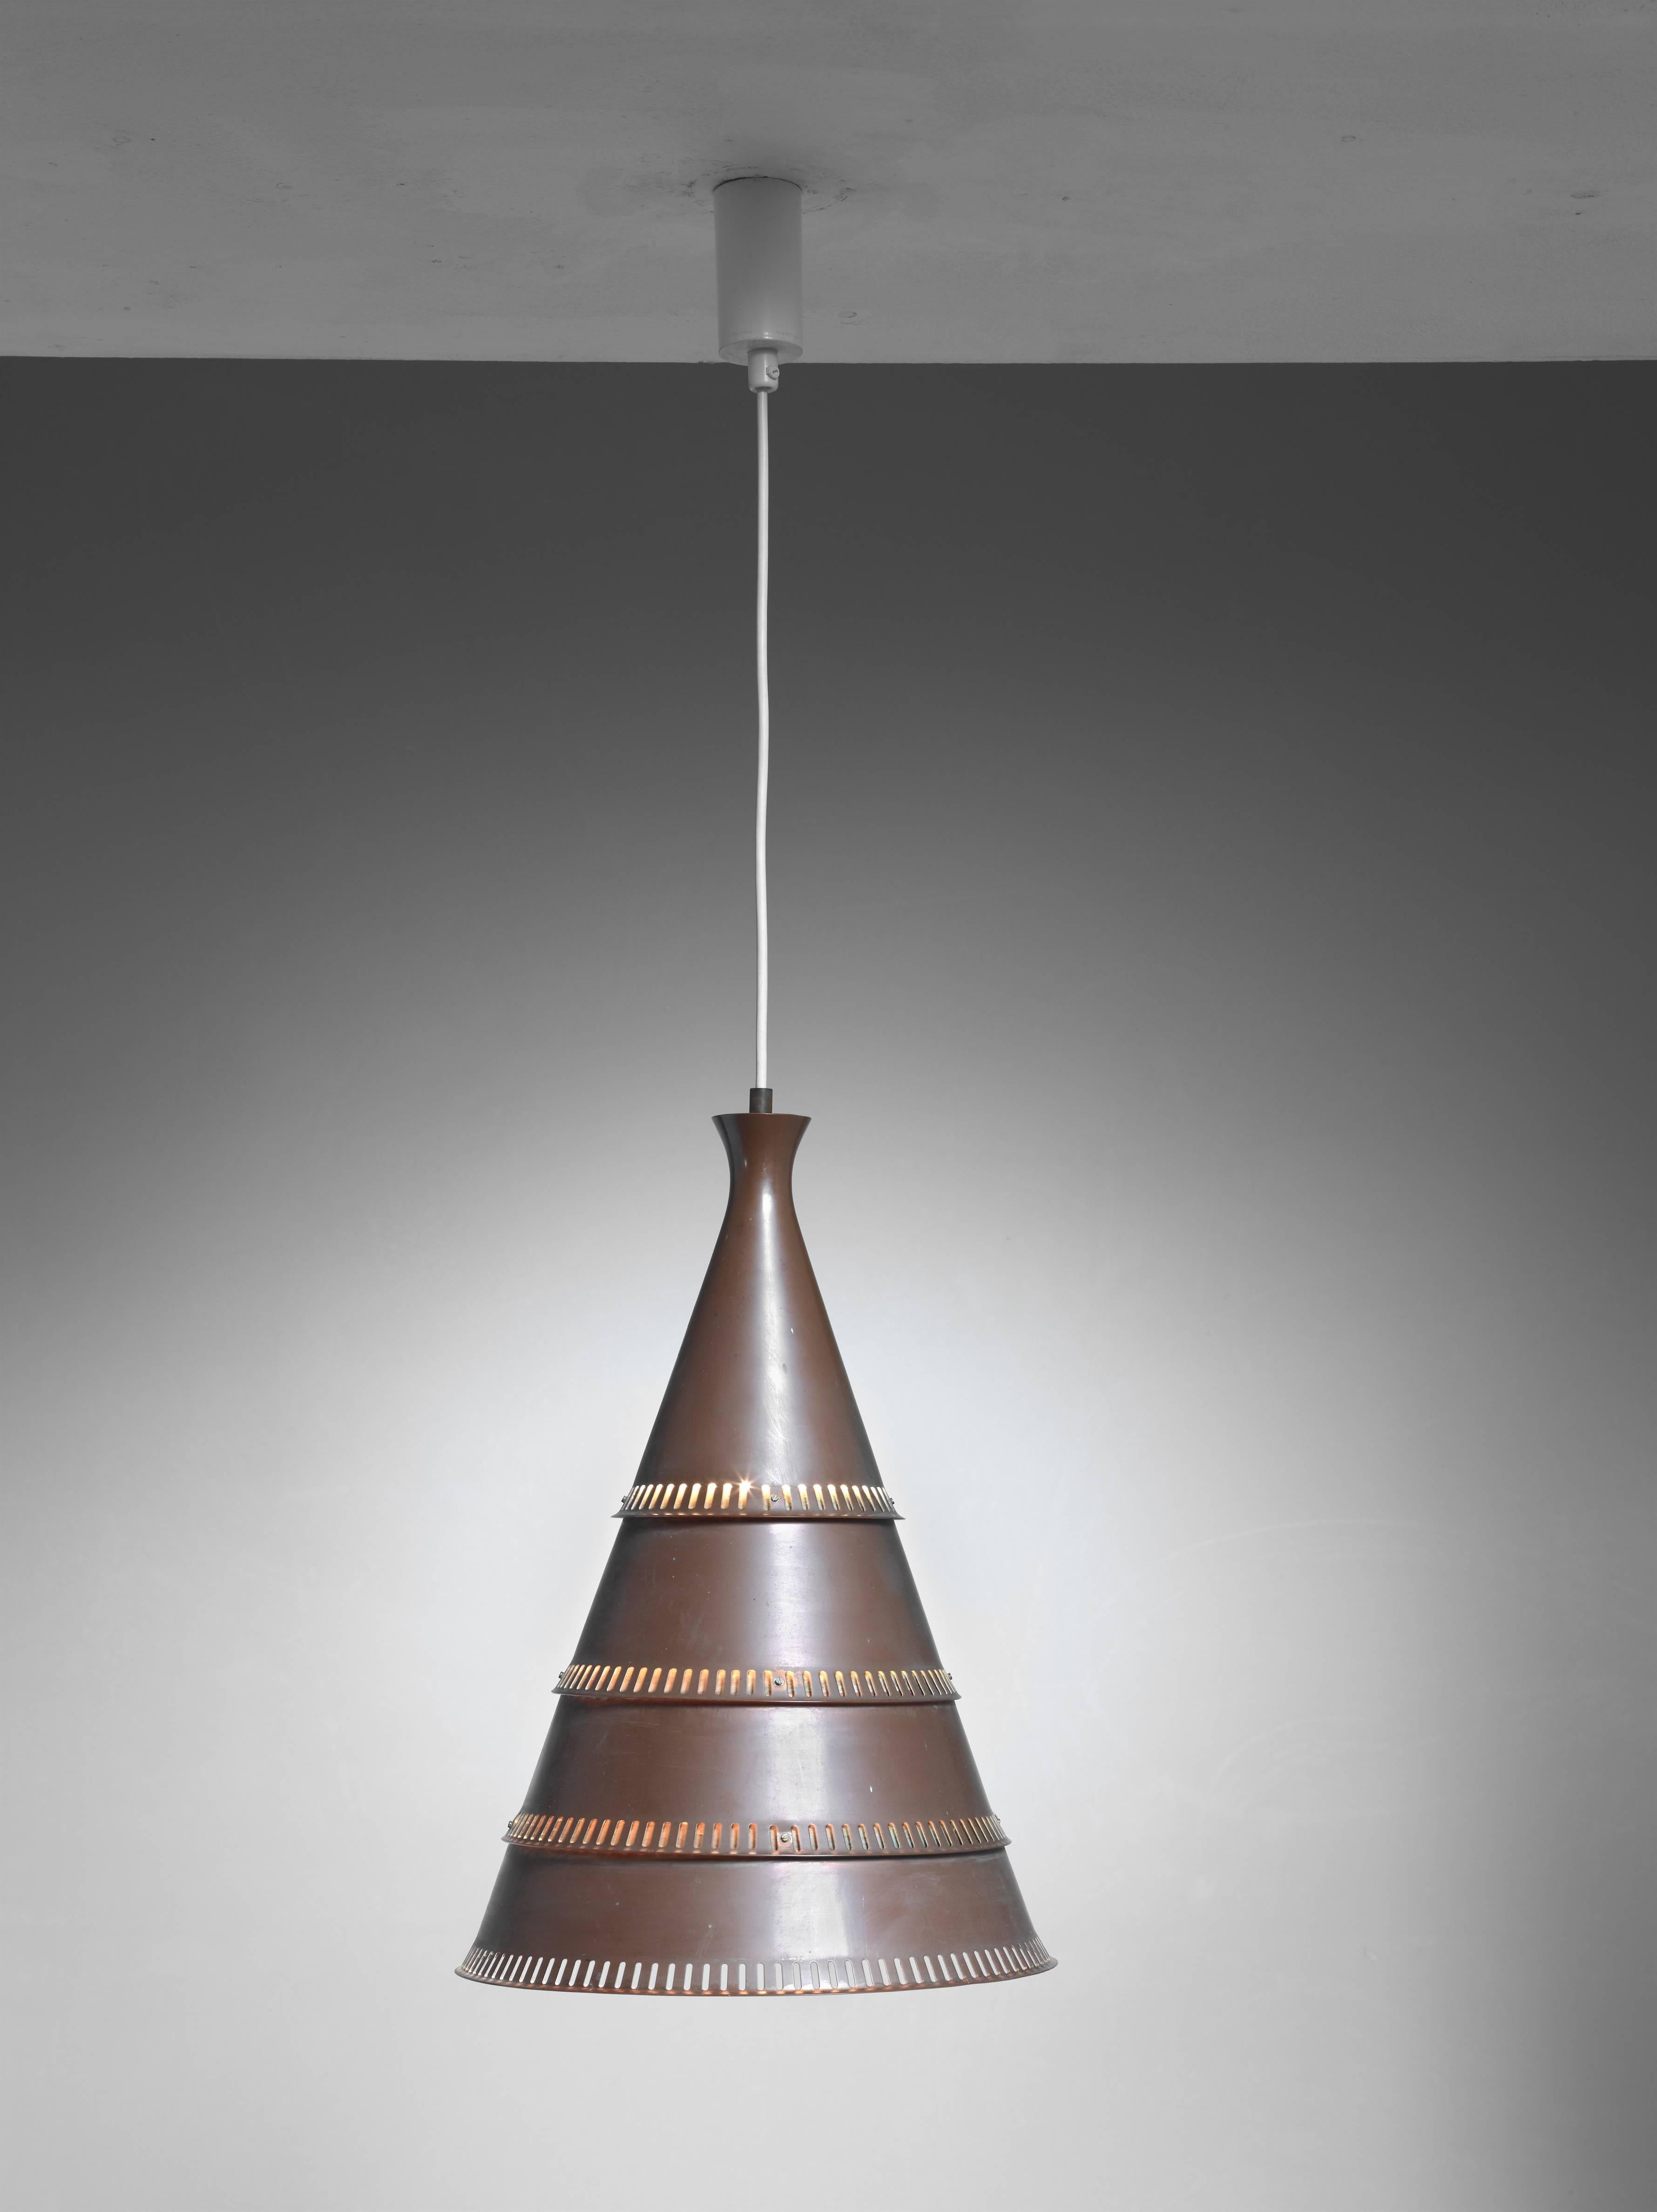 A cone-shaped brown copper model p208 pendant lamp by Knud Hjerting for Lyfa.

We can adjust the total drop to your requirements. The lamp holds an E26/E27 light bulb.

 